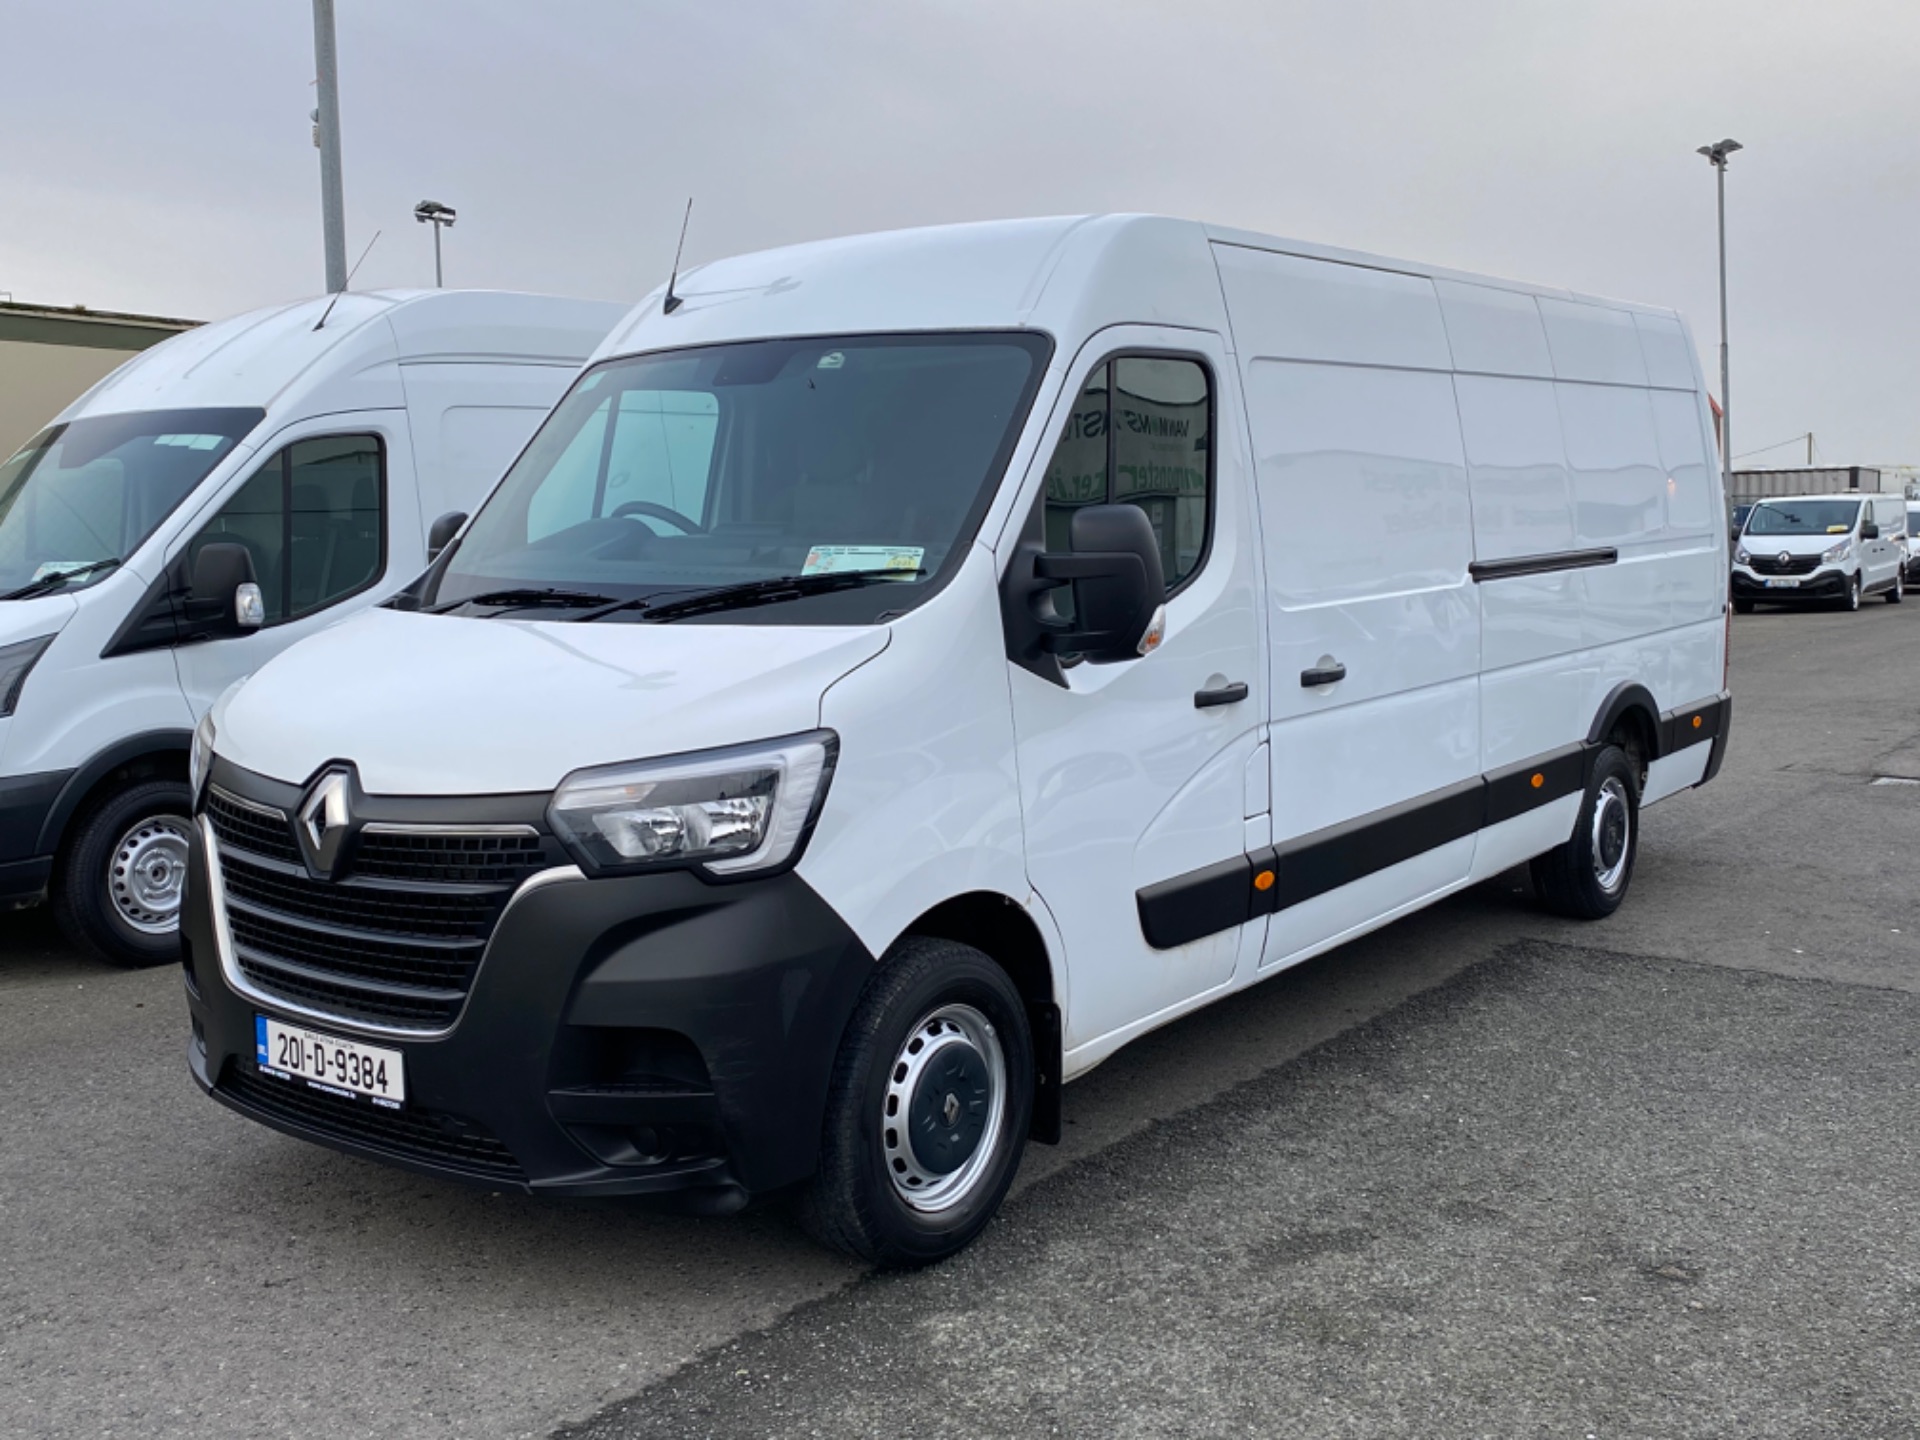 2020 Renault Master RWD LML35 DCI 130 Business MY1 (201D9384) Image 4